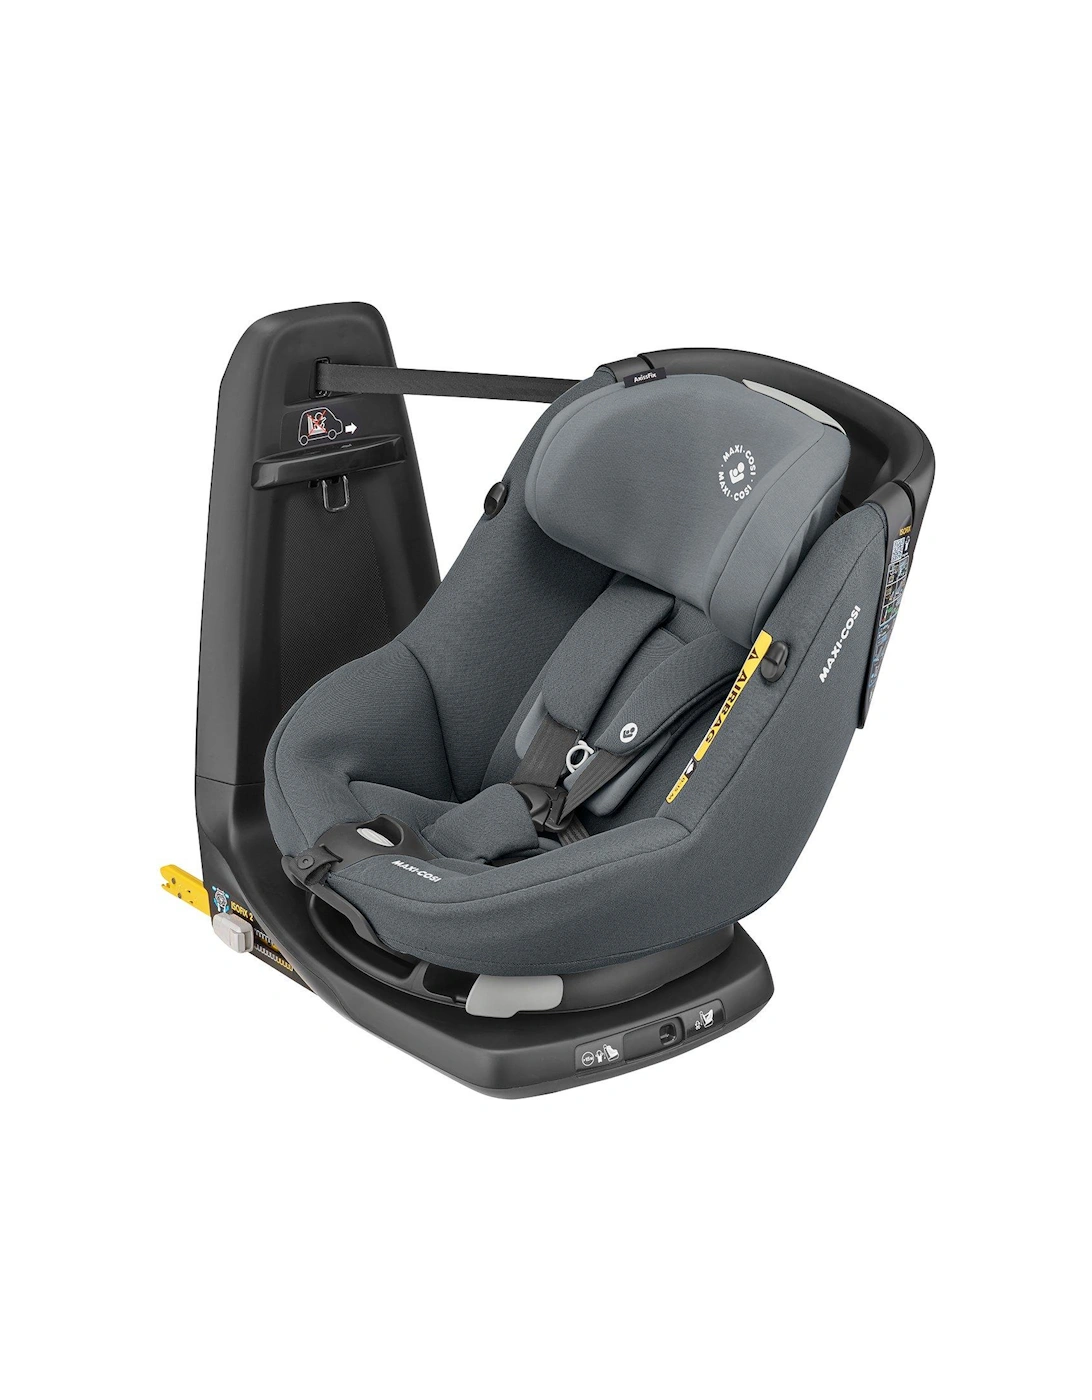 Maxi-Cosi Axissfix Rotating Car Seat i-Size (4 months - 4 years) - Authentic Graphite, 2 of 1